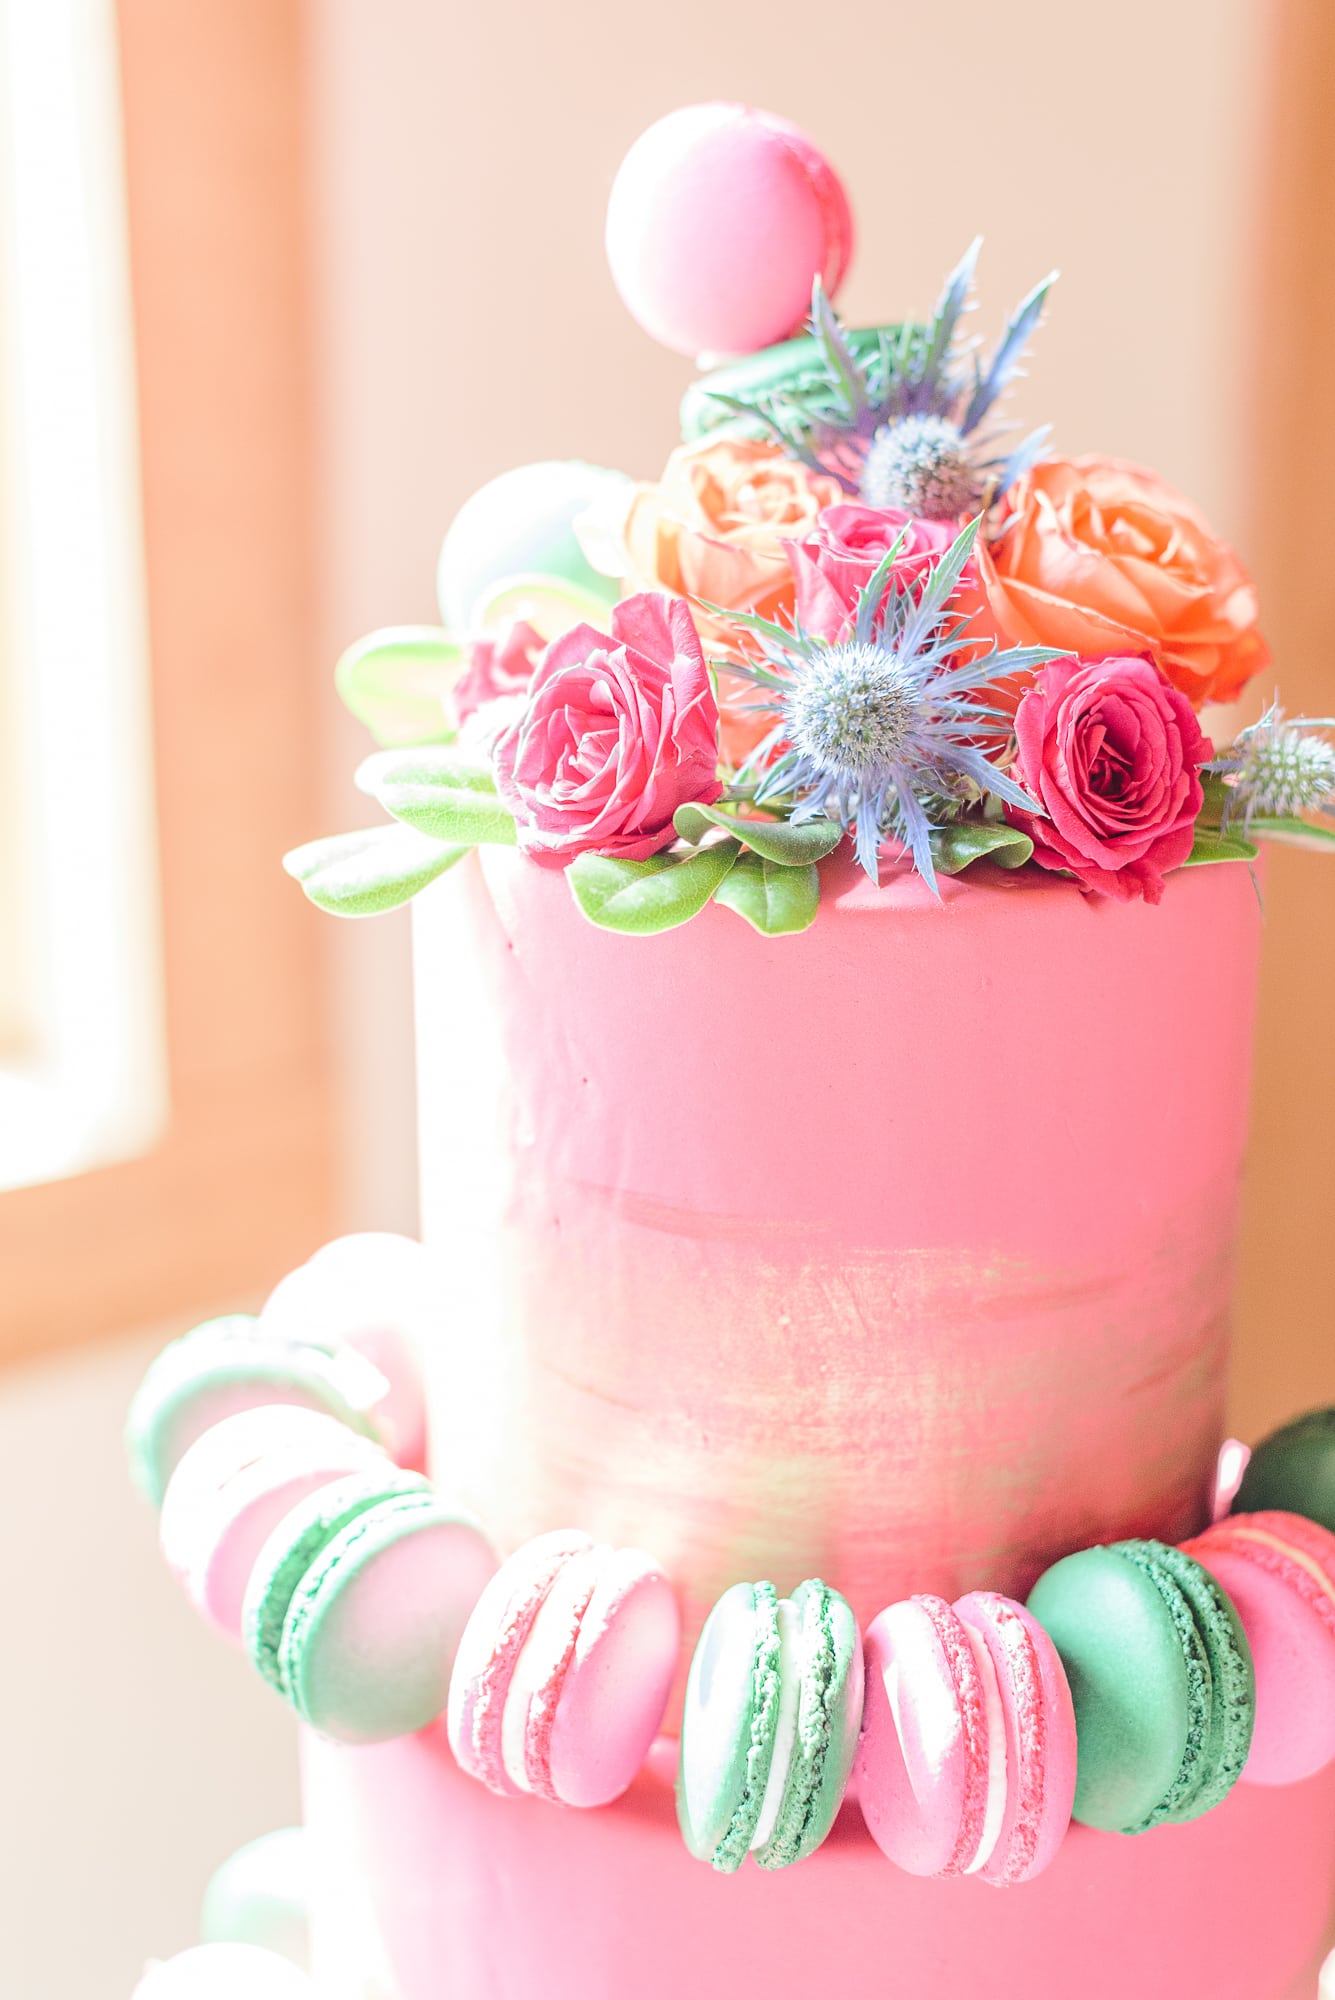 This Belmont NC wedding venue had a gorgeous three tiered pink cake decorated with macarons.